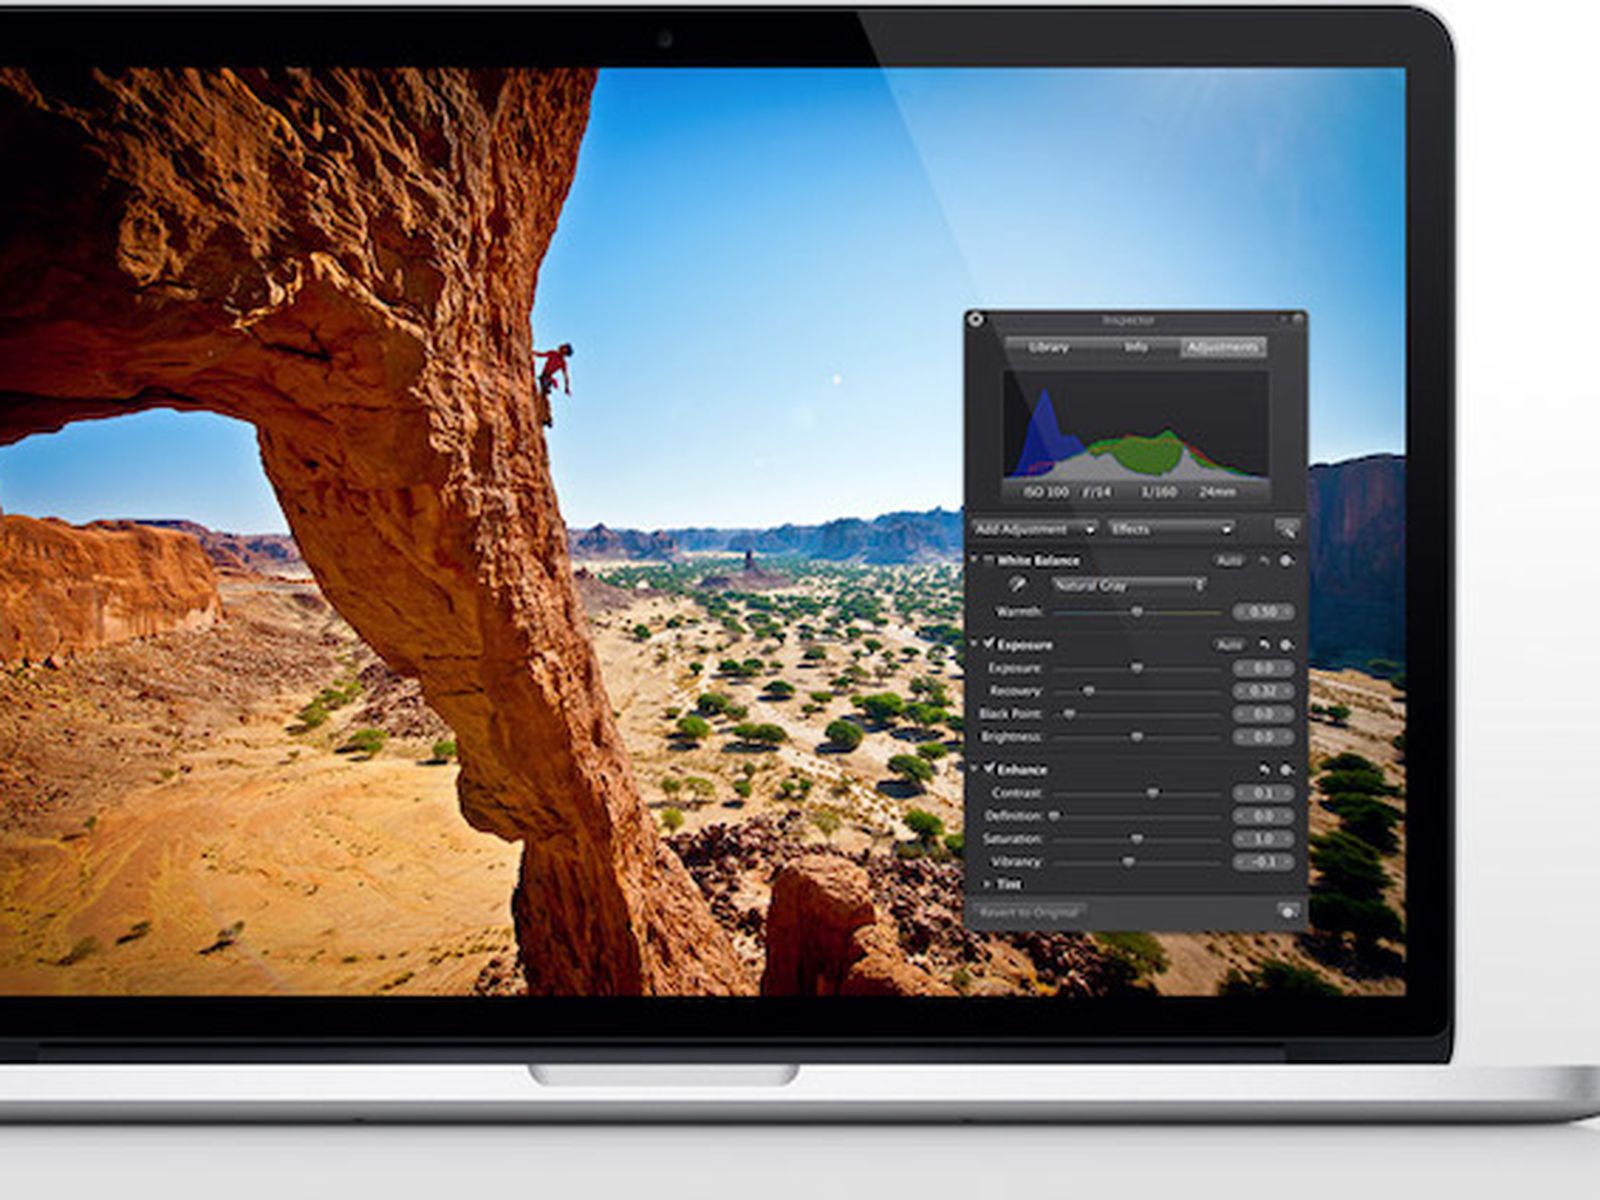 is aperture still available for mac